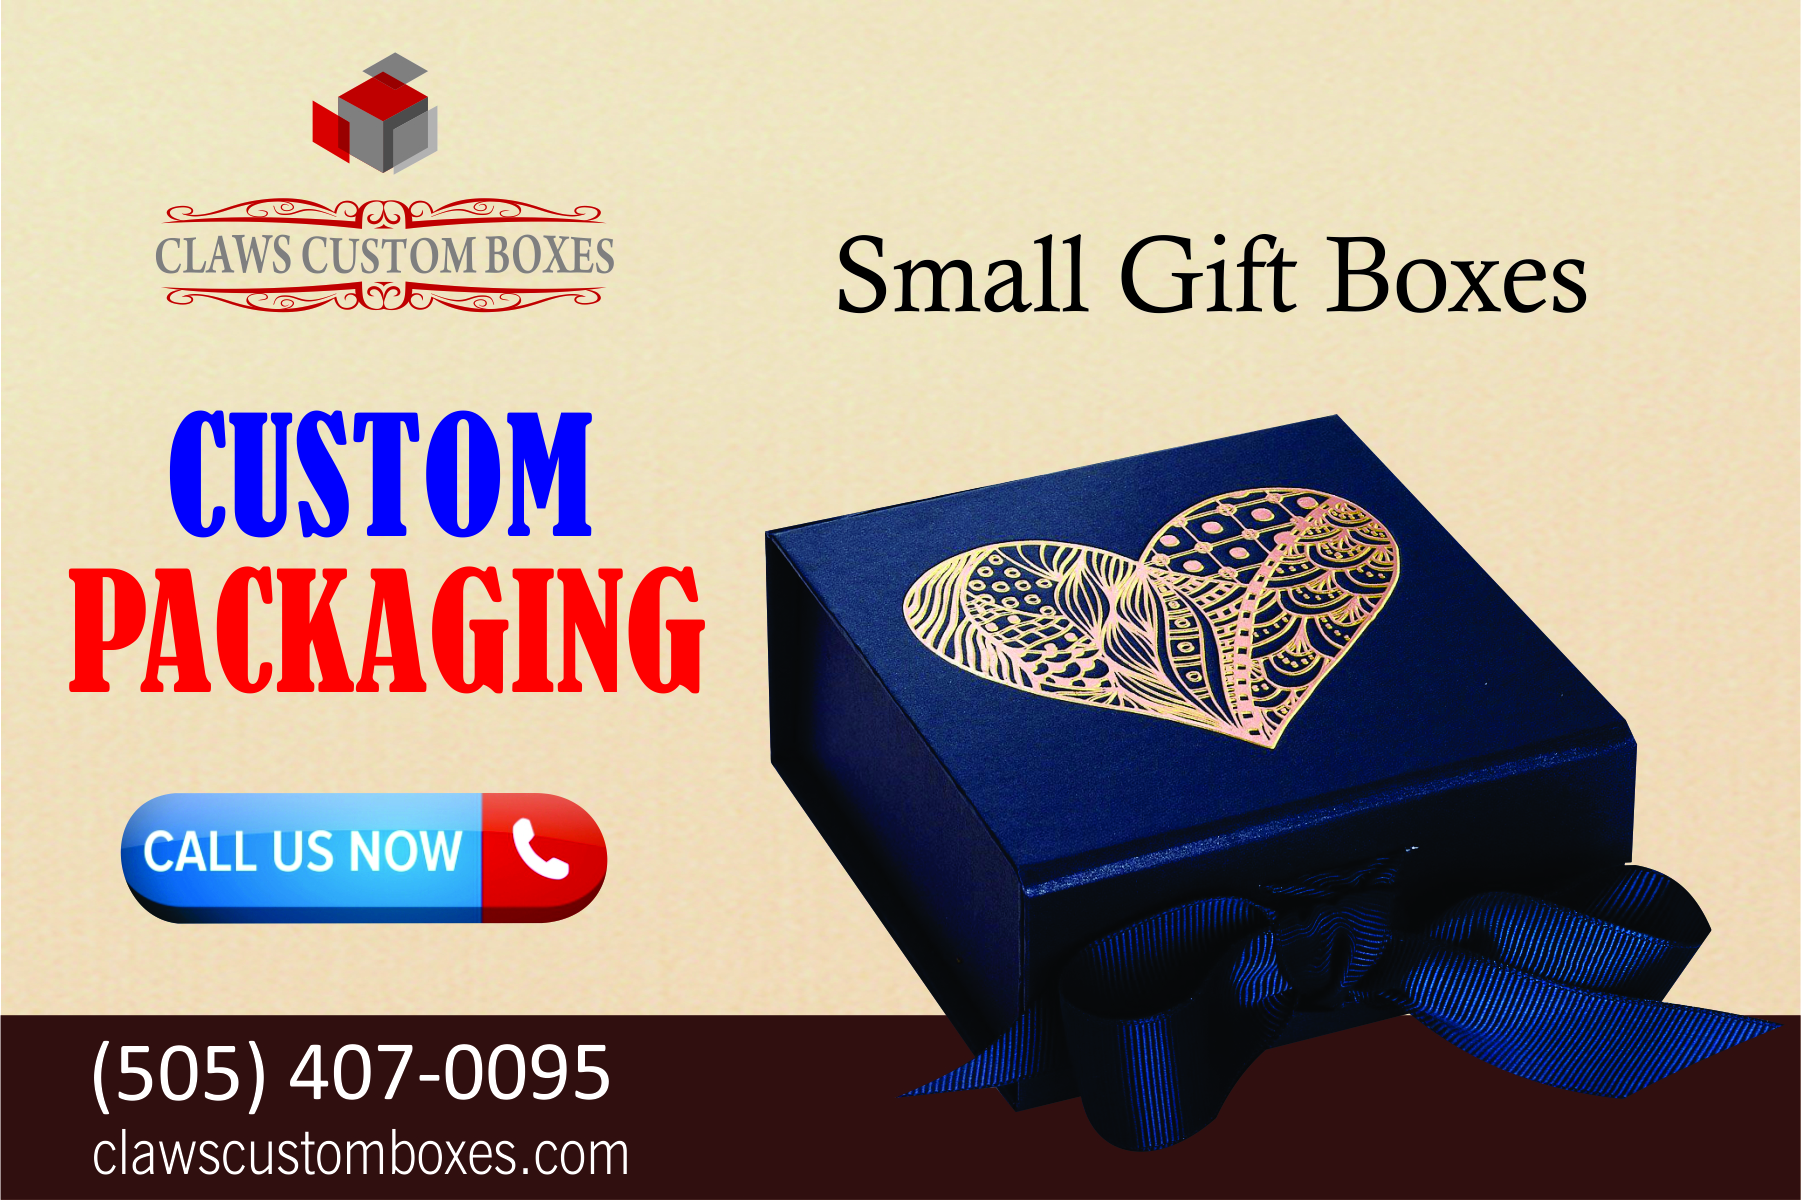 Small gift boxes are best to display the productsServicesBusiness OffersWest DelhiOther